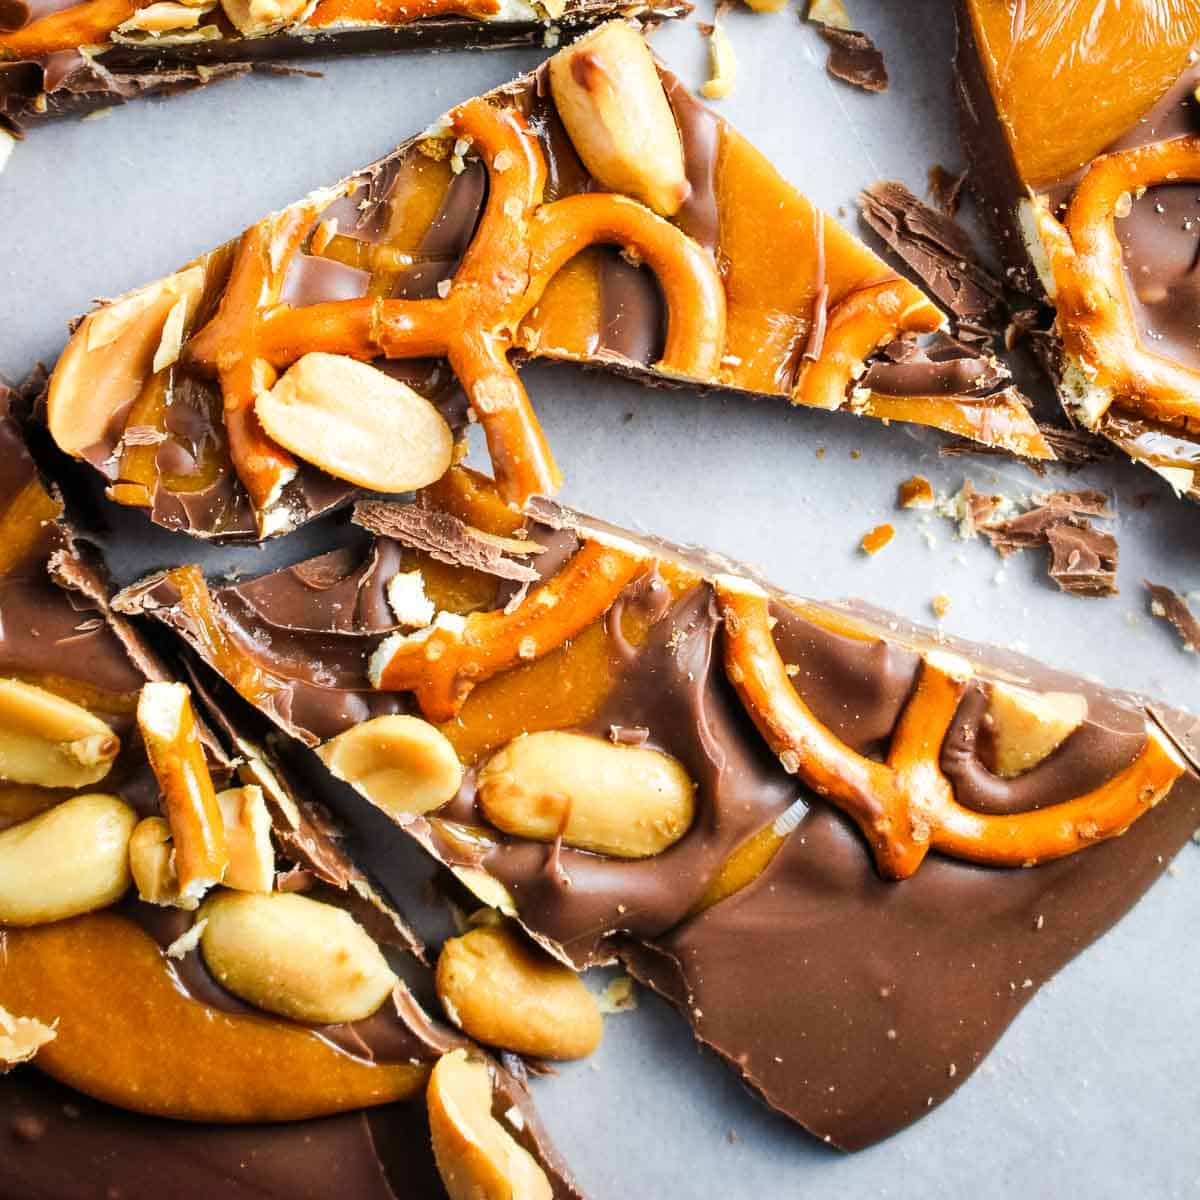 Pieces of chocolate bark with pretzels, peanuts and caramel.